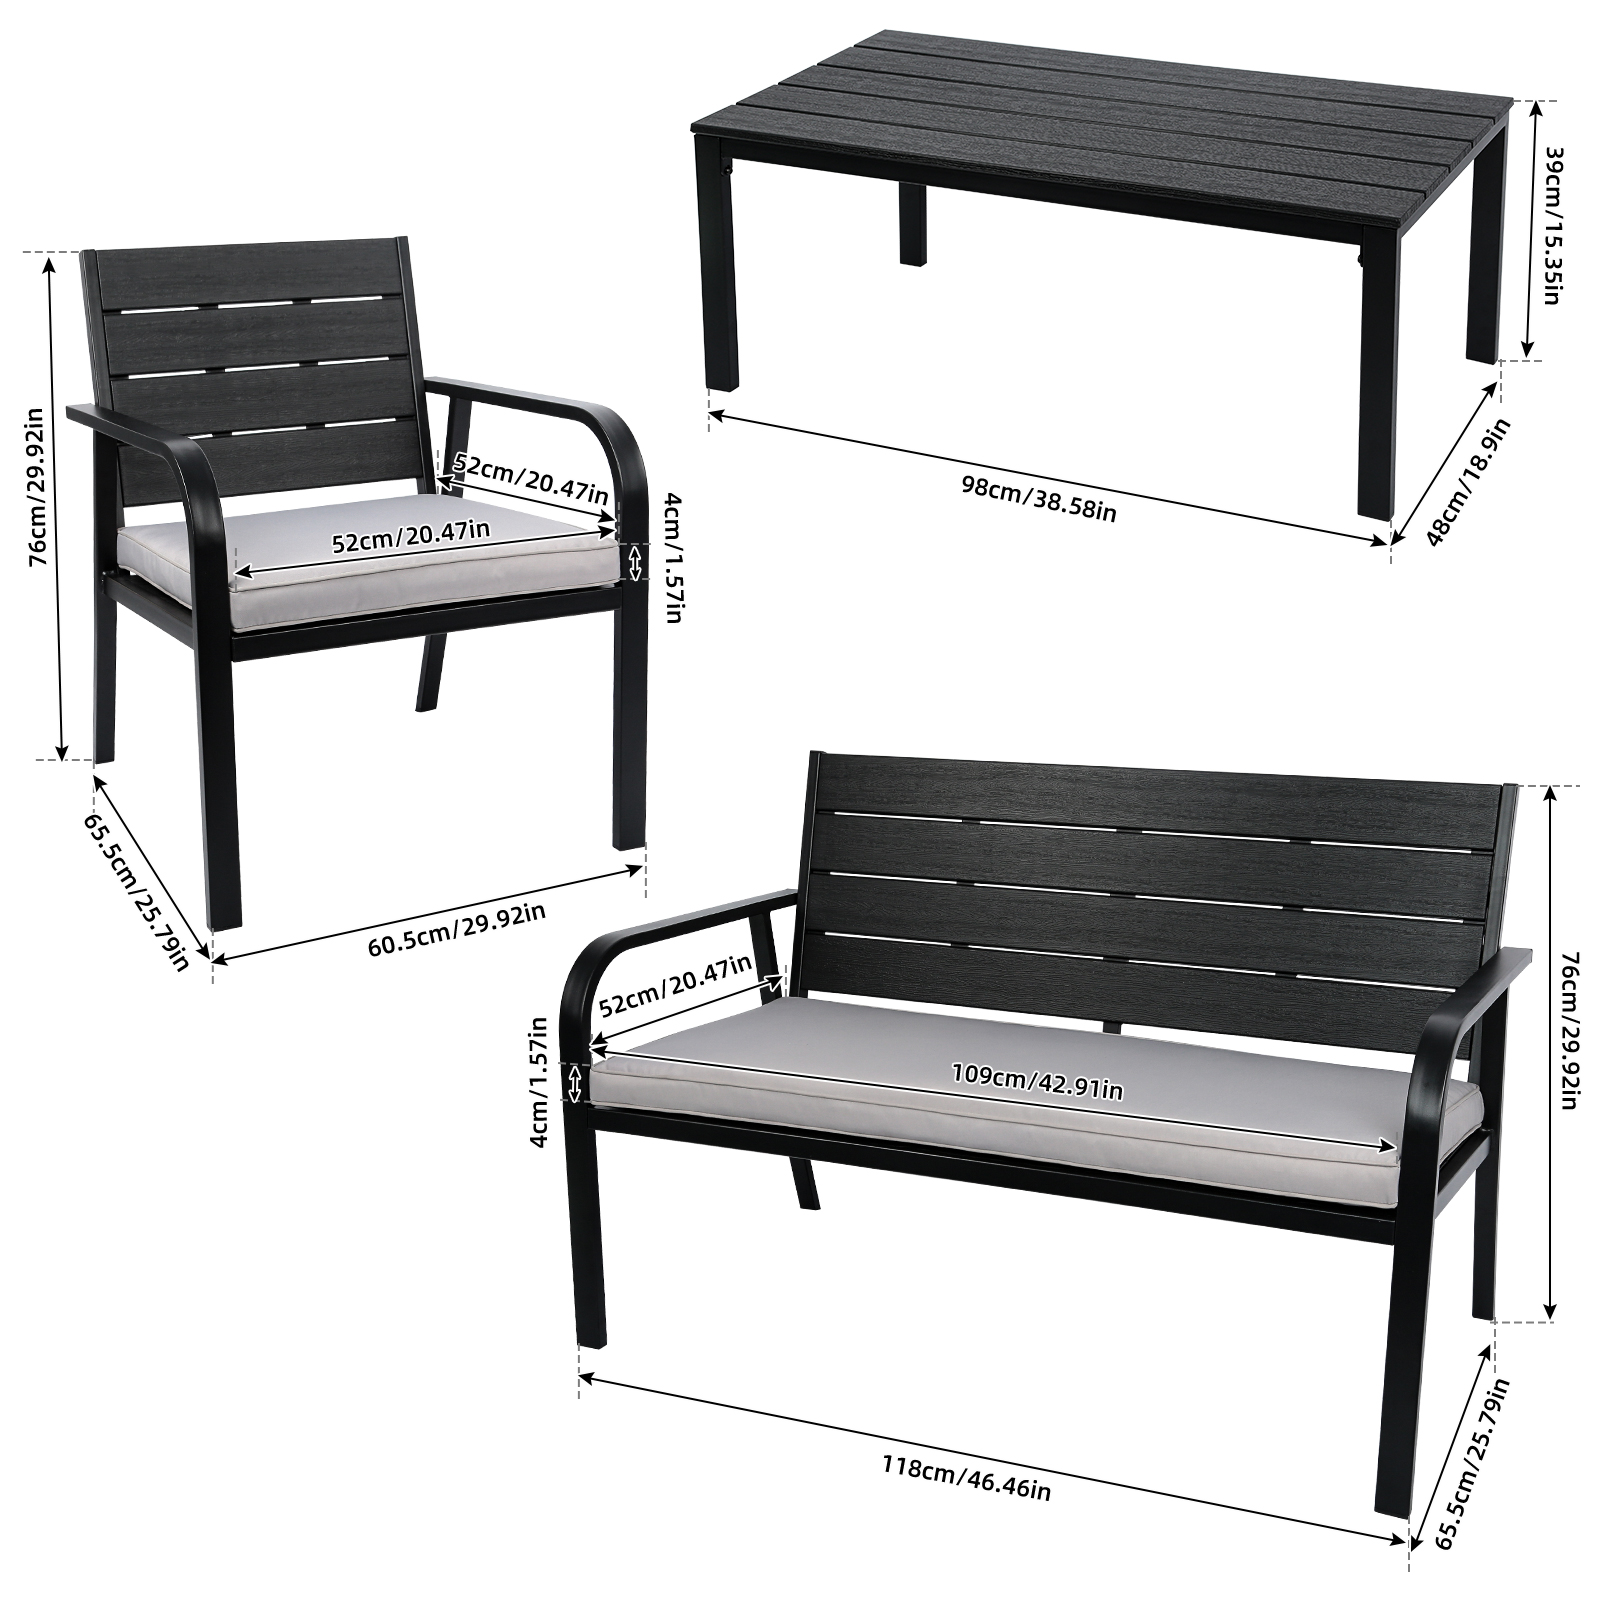 OWSOO 4 Pieces Patio Garden Sofa Conversation Set Wood Grain Design PE Steel Frame Loveseat All Weather  Furniture Set with Cushions Coffee Table for Backyard Balcony Lawn Black and Grey - image 2 of 7